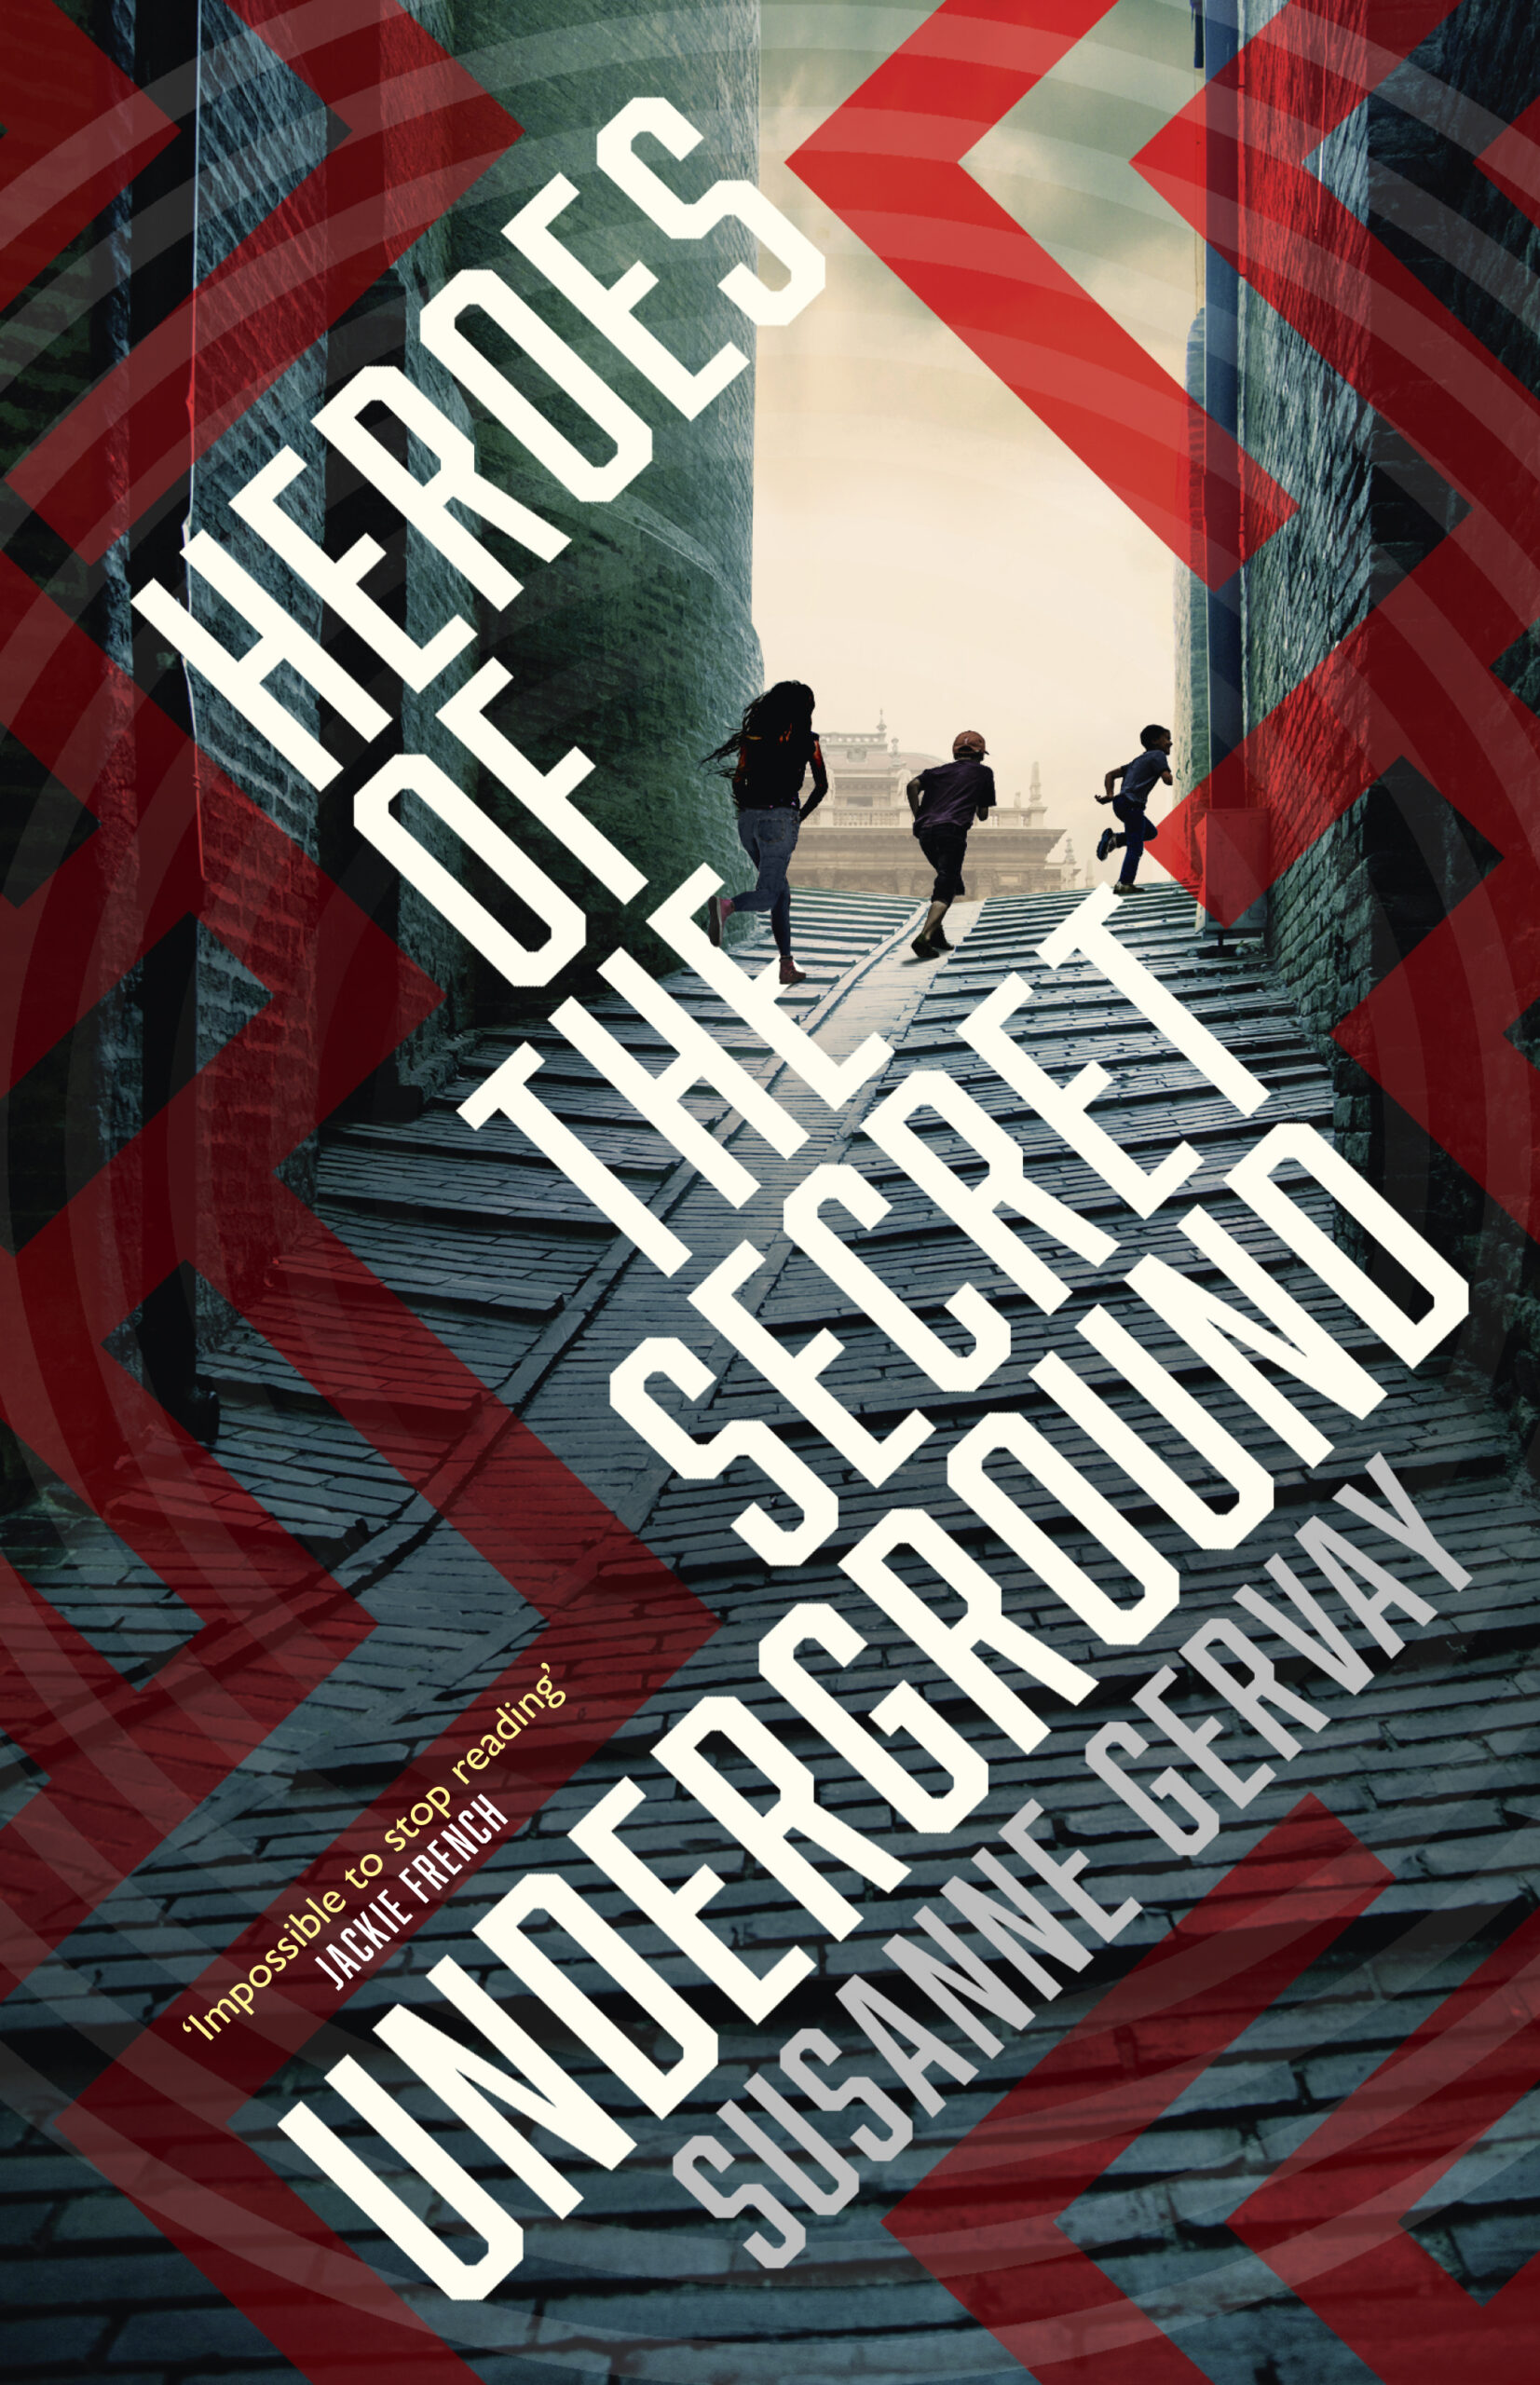 Cover of Heroes of the Secret Underground, by Susanne Gervay